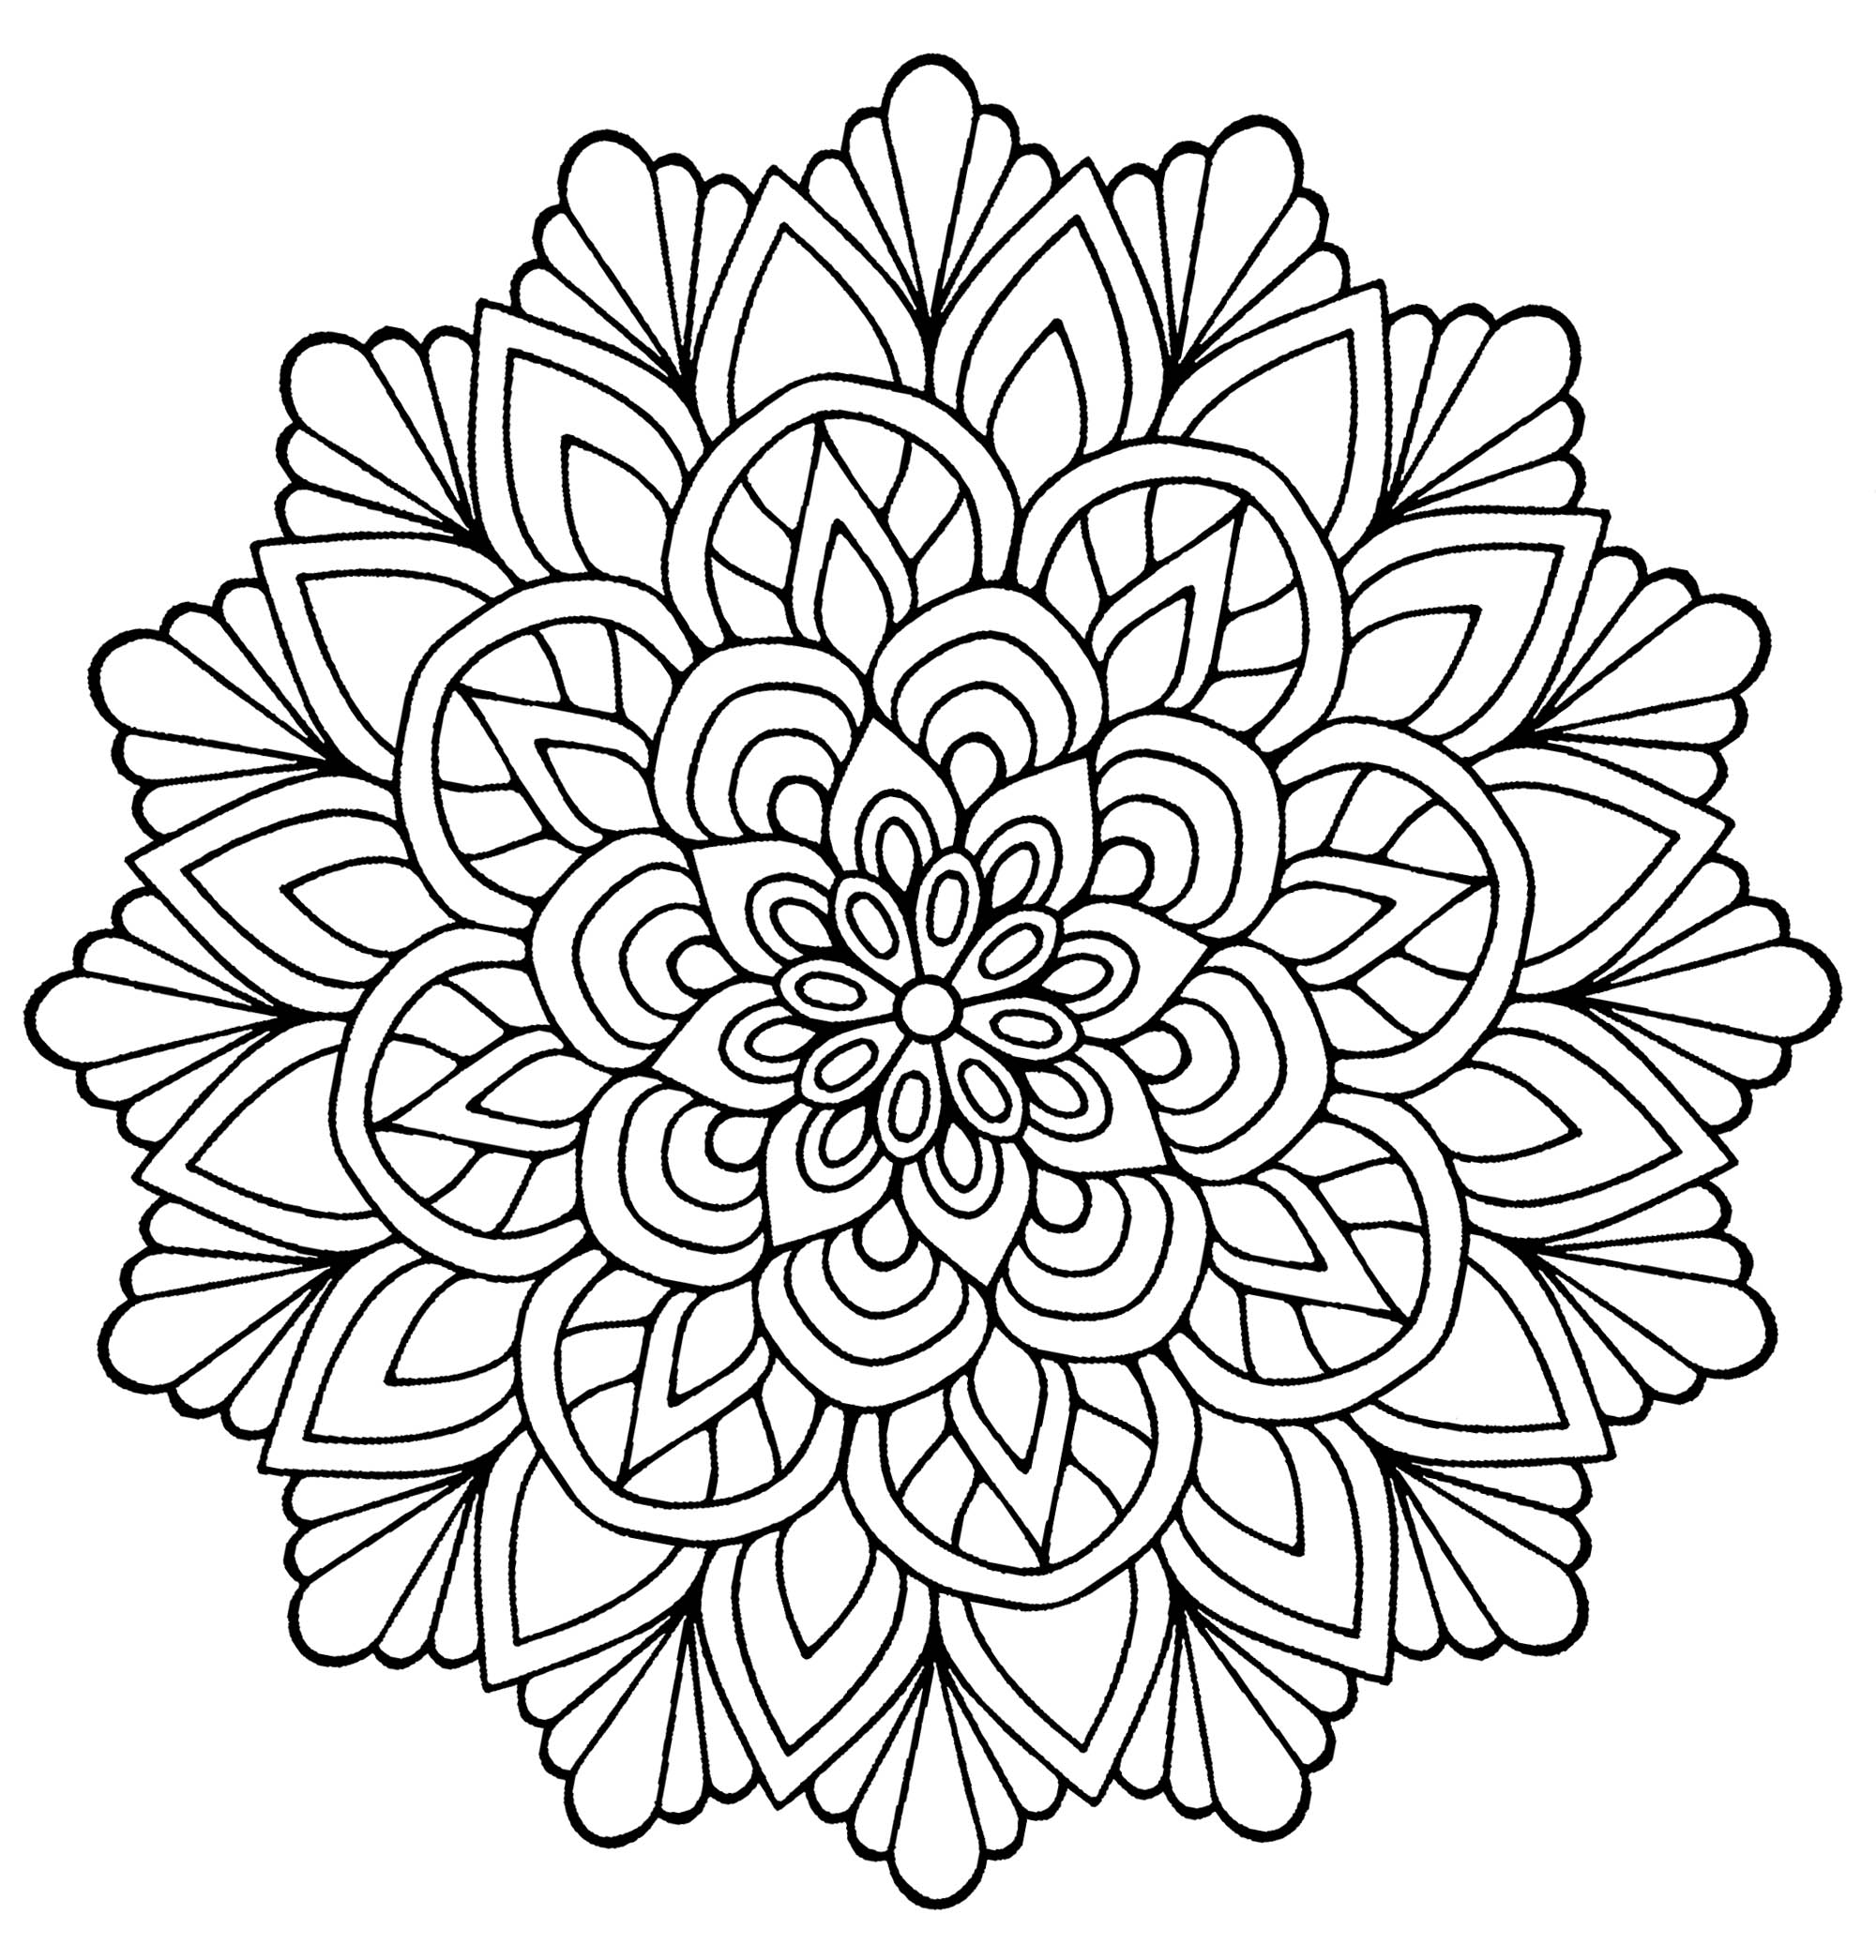 Download Mandala flower with leaves - Mandalas Adult Coloring Pages